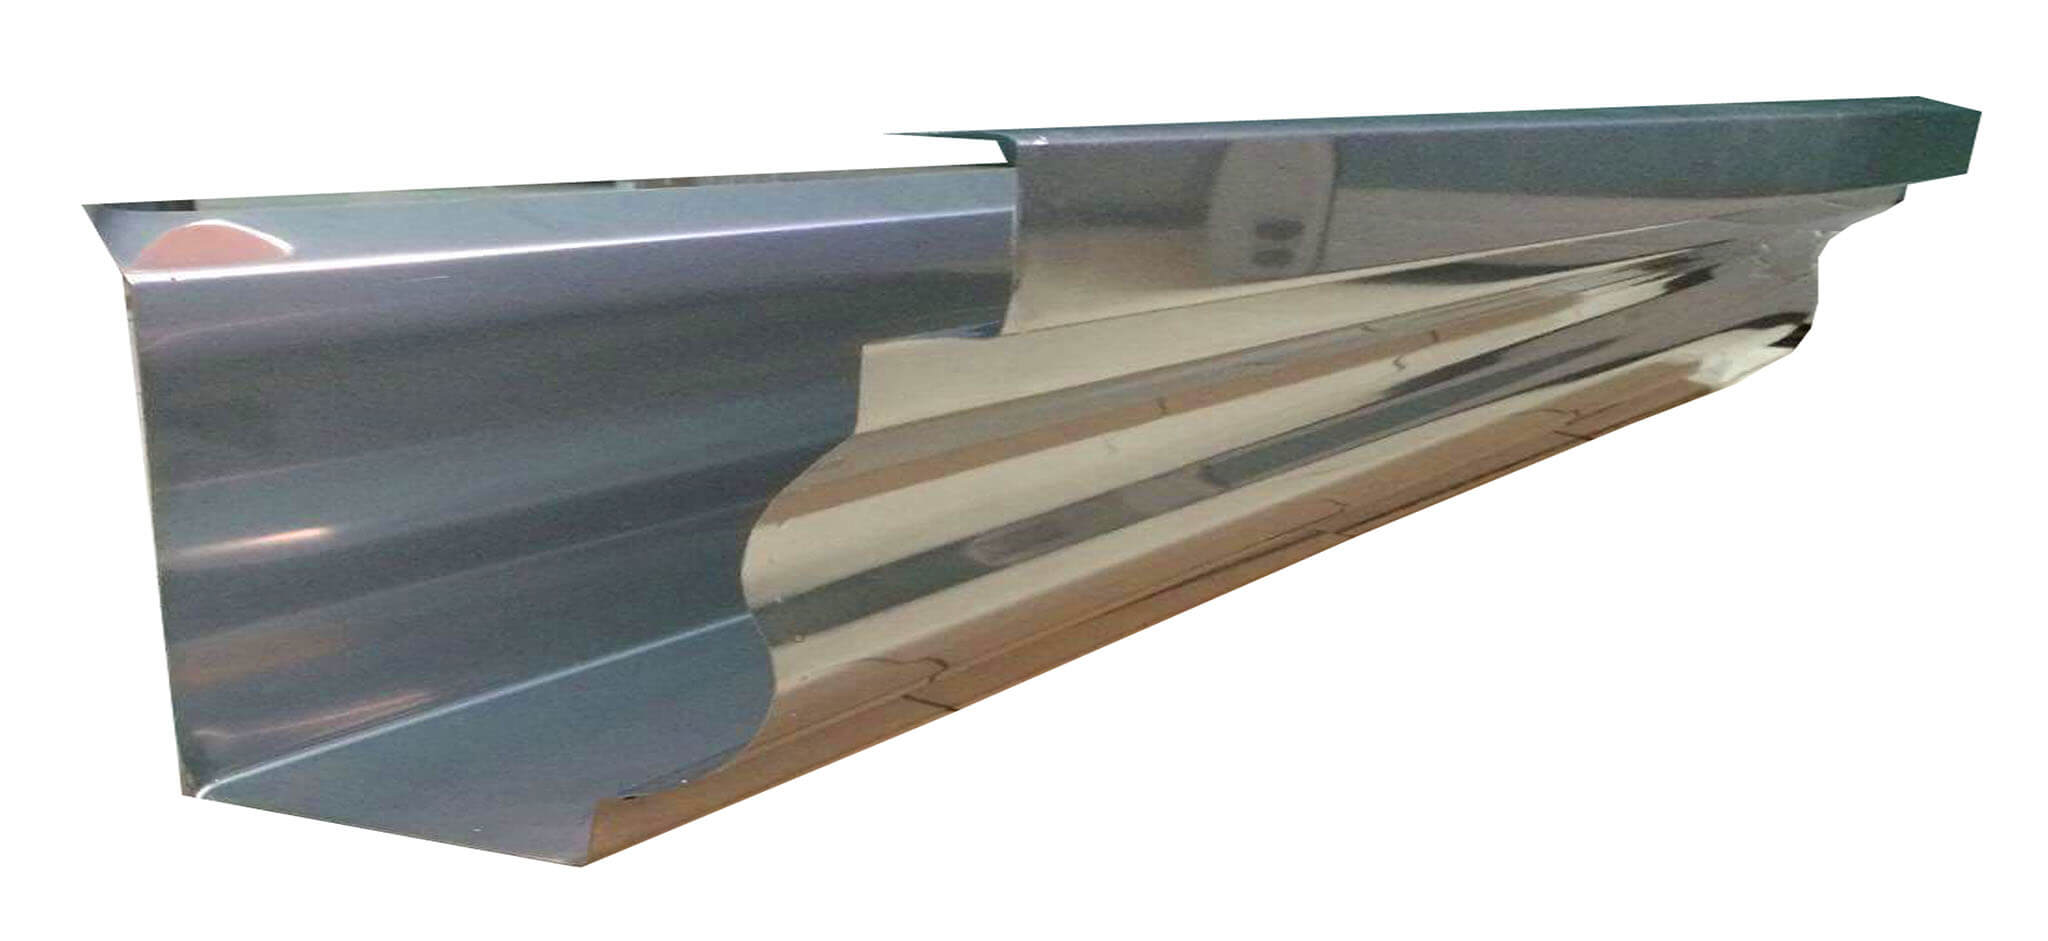 Stainless Roof Gutters Alpha Steel Roofing Supplier in the Philippines